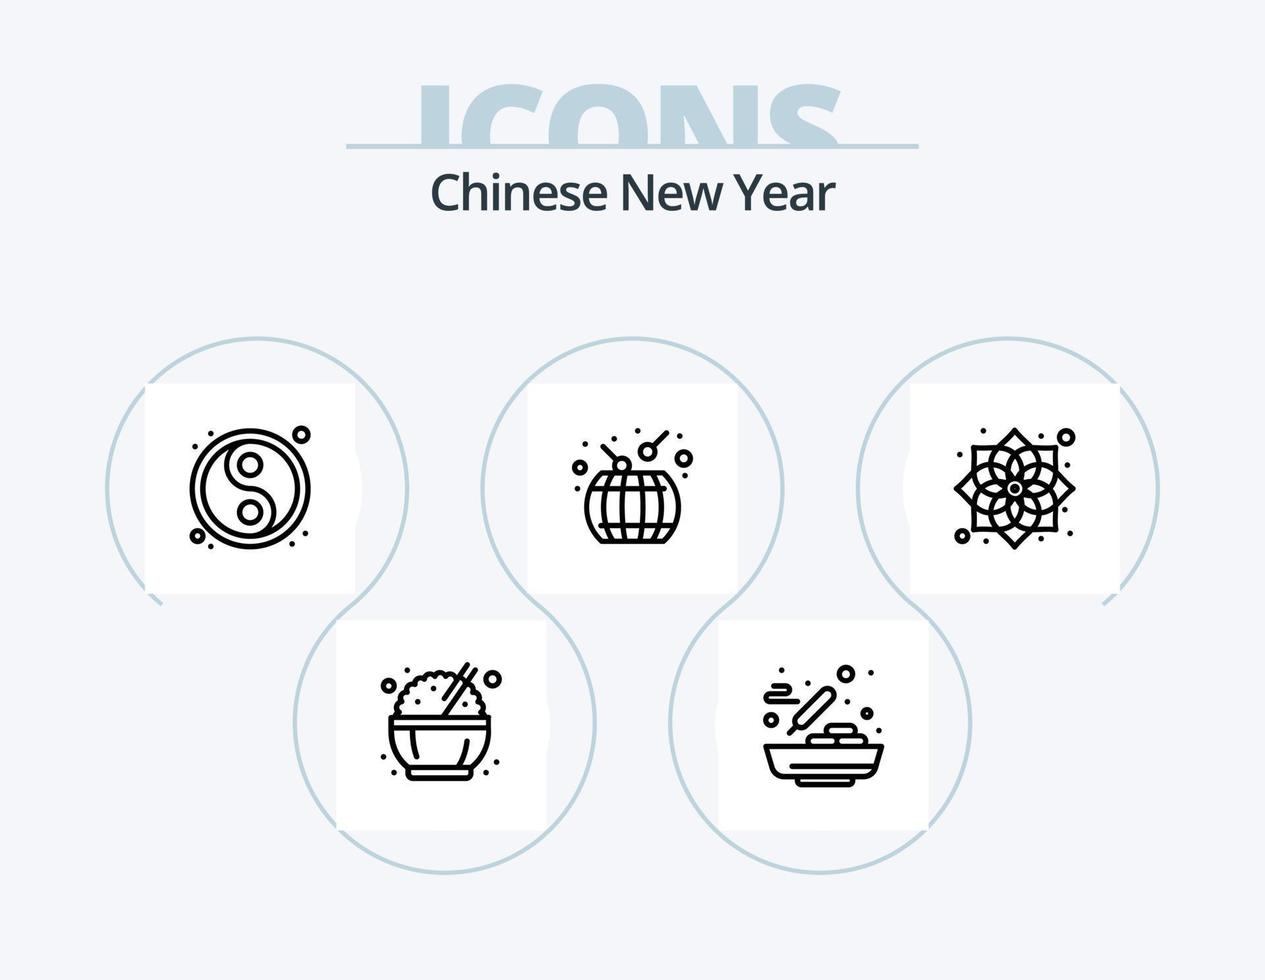 Chinese New Year Line Icon Pack 5 Icon Design. door. year. food. new. china vector